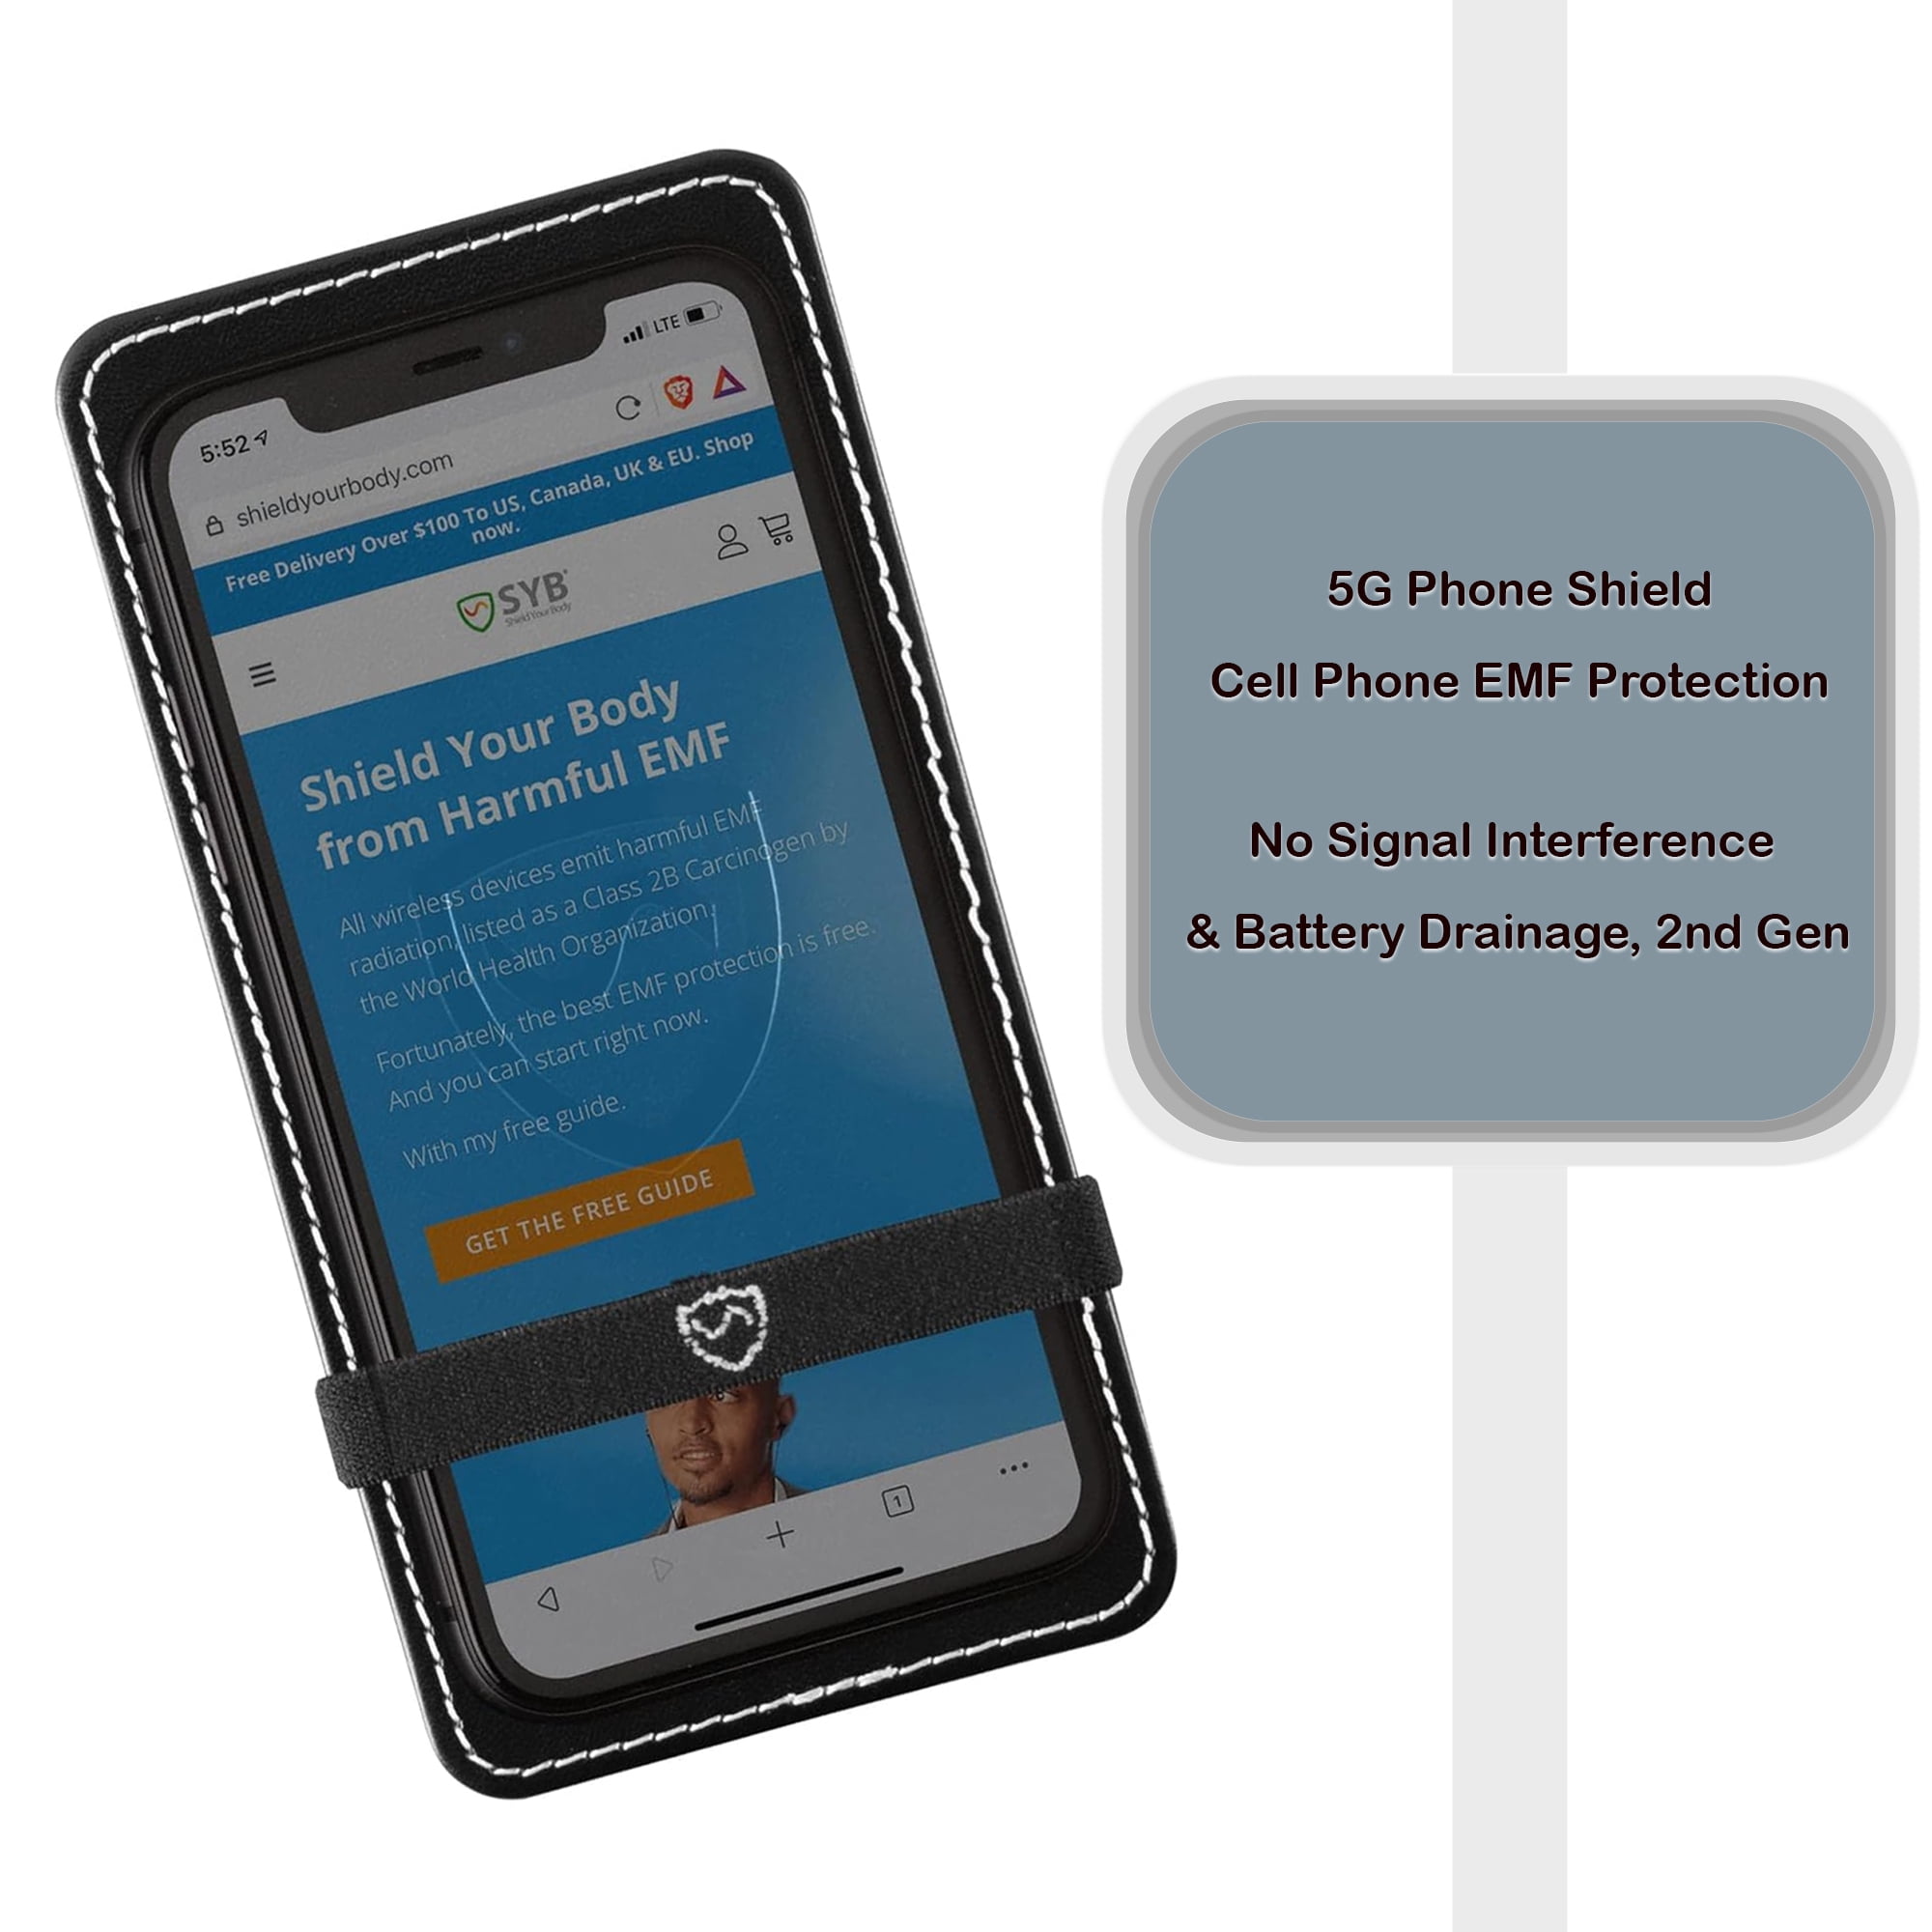 Emf protection for cell phone